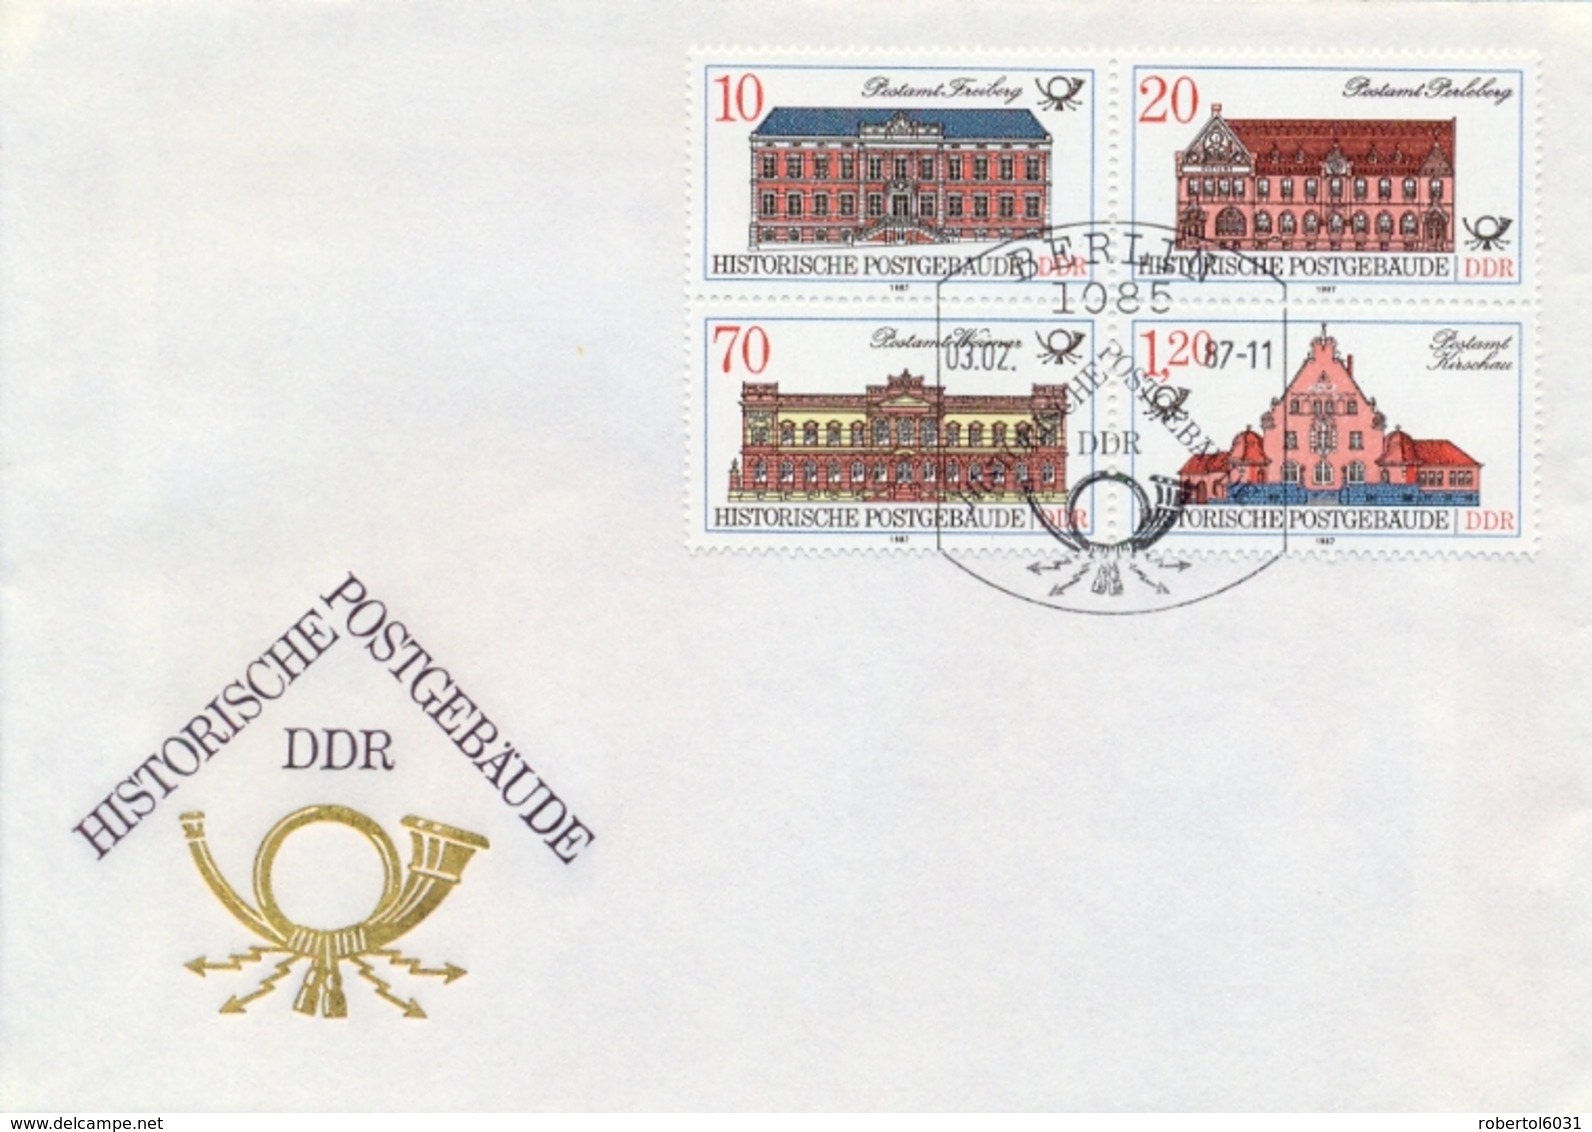 Germany DDR 1987 FDC Historic Post Offices Block Of Four - Posta